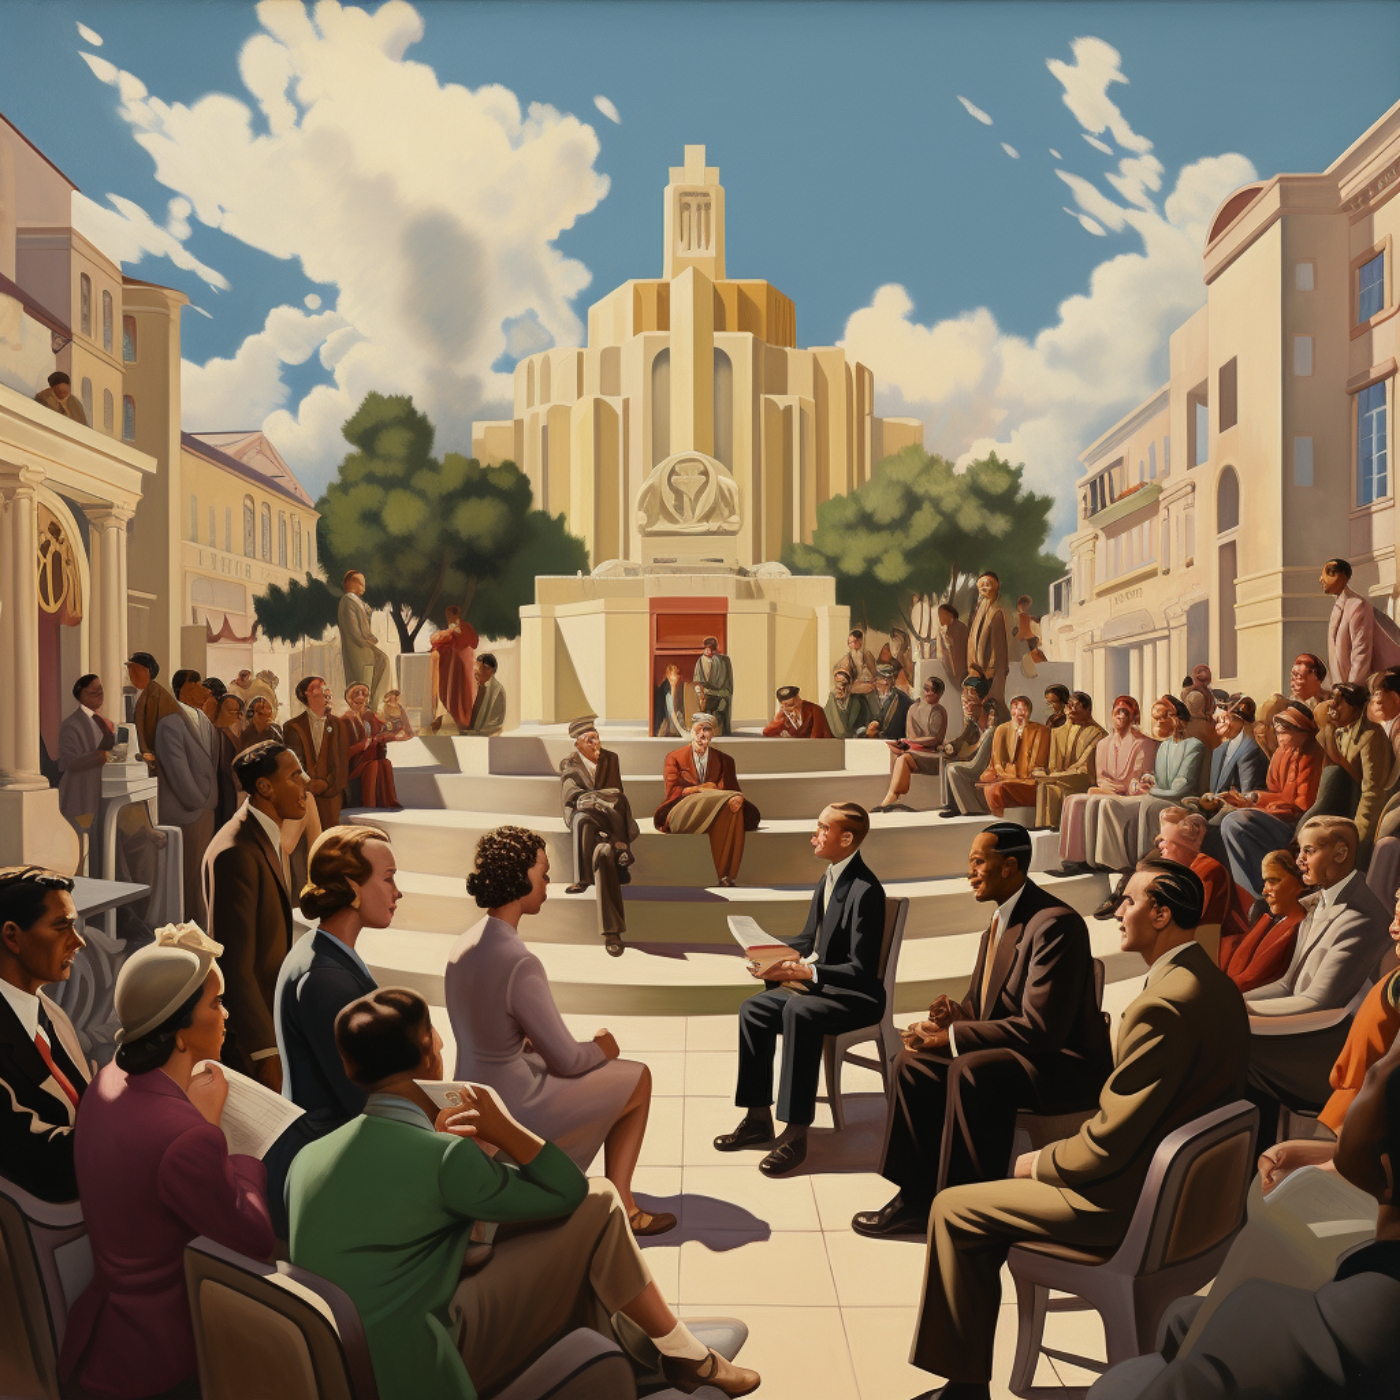 An art deco set of laws being read from a town square with the people in the square sharing questions and suggestions in a peaceful way